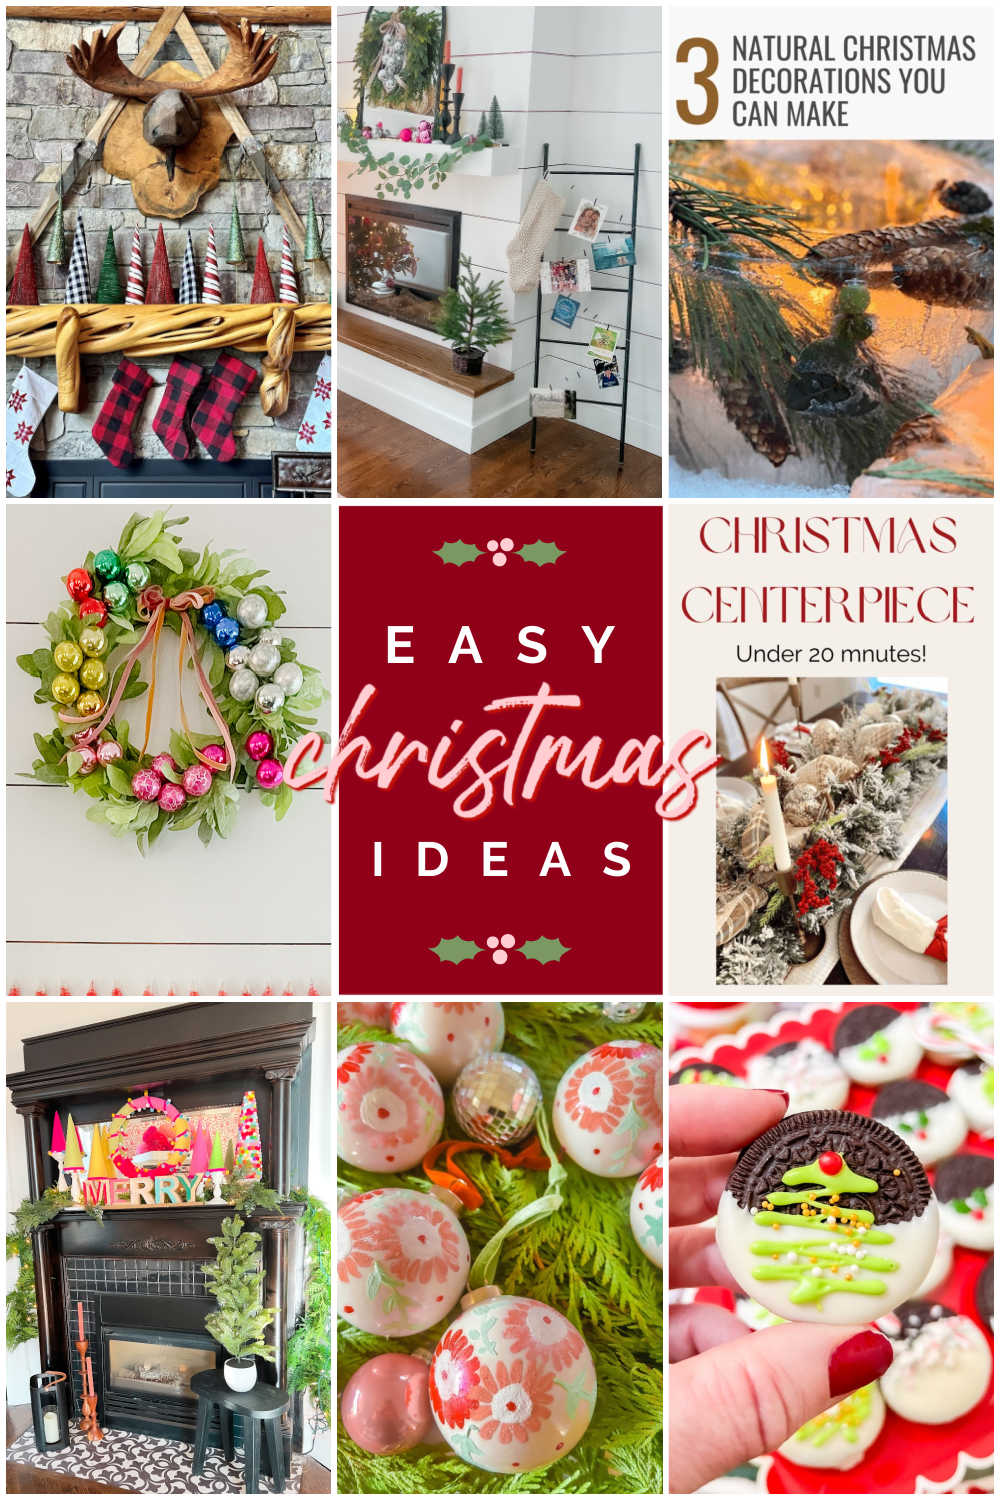 Easy Christmas Ideas. Make your home merry and bright with these easy and festive holiday ideas! 